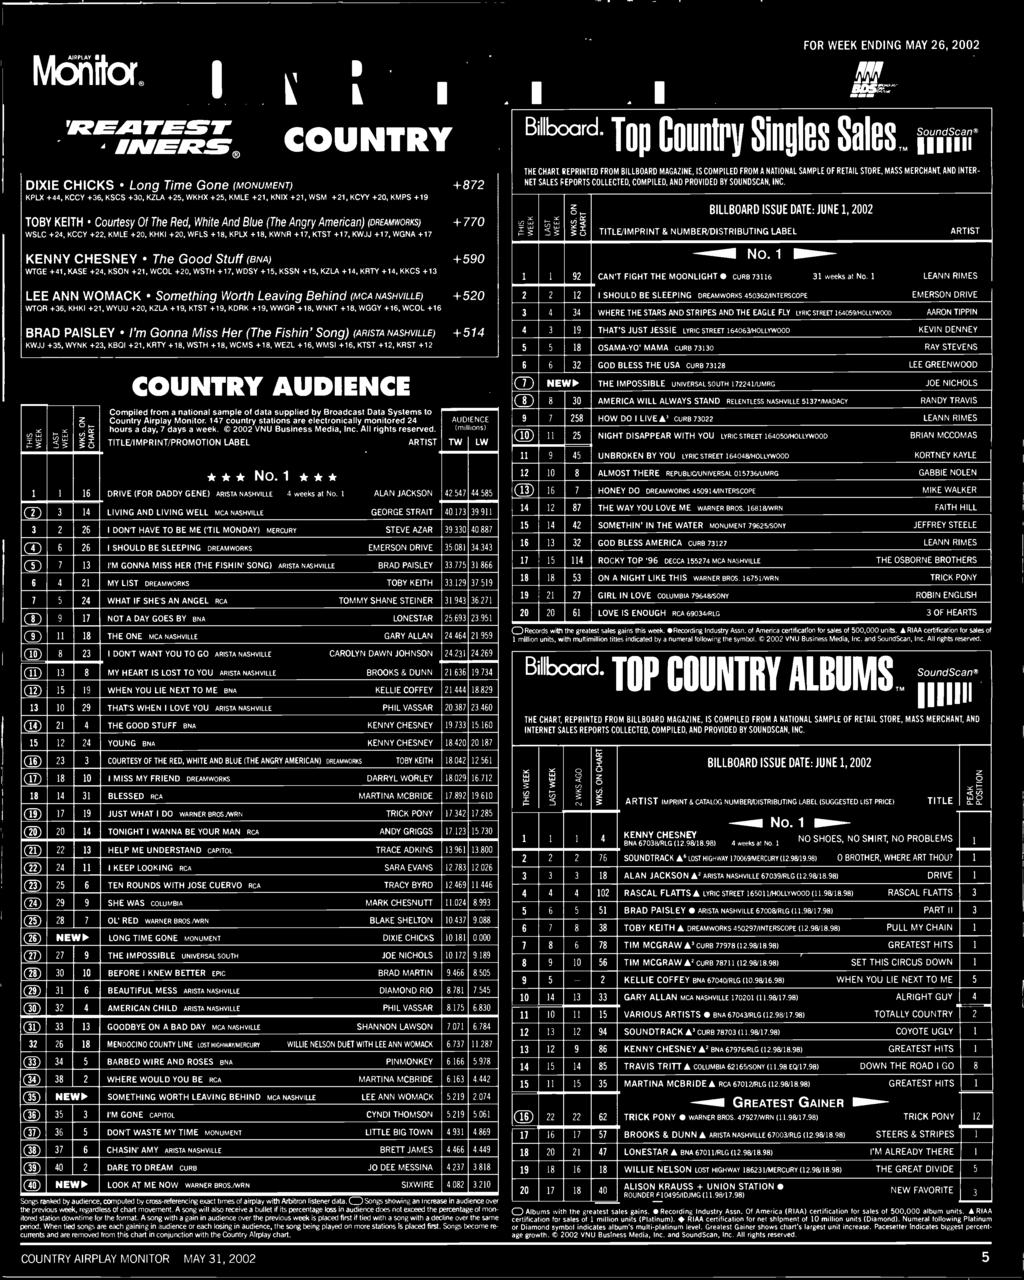 K0 +, KRTY +8, WSTH +8, WCMS +8, WEZL +, WMS +, KTST +, KRST + V, L., L' ',c Li. L' '. cc 5 COUNTRY AUDENCE Compiled from a national sample of data supplied by Broadcast Data Systems to Country Airplay Monitor.